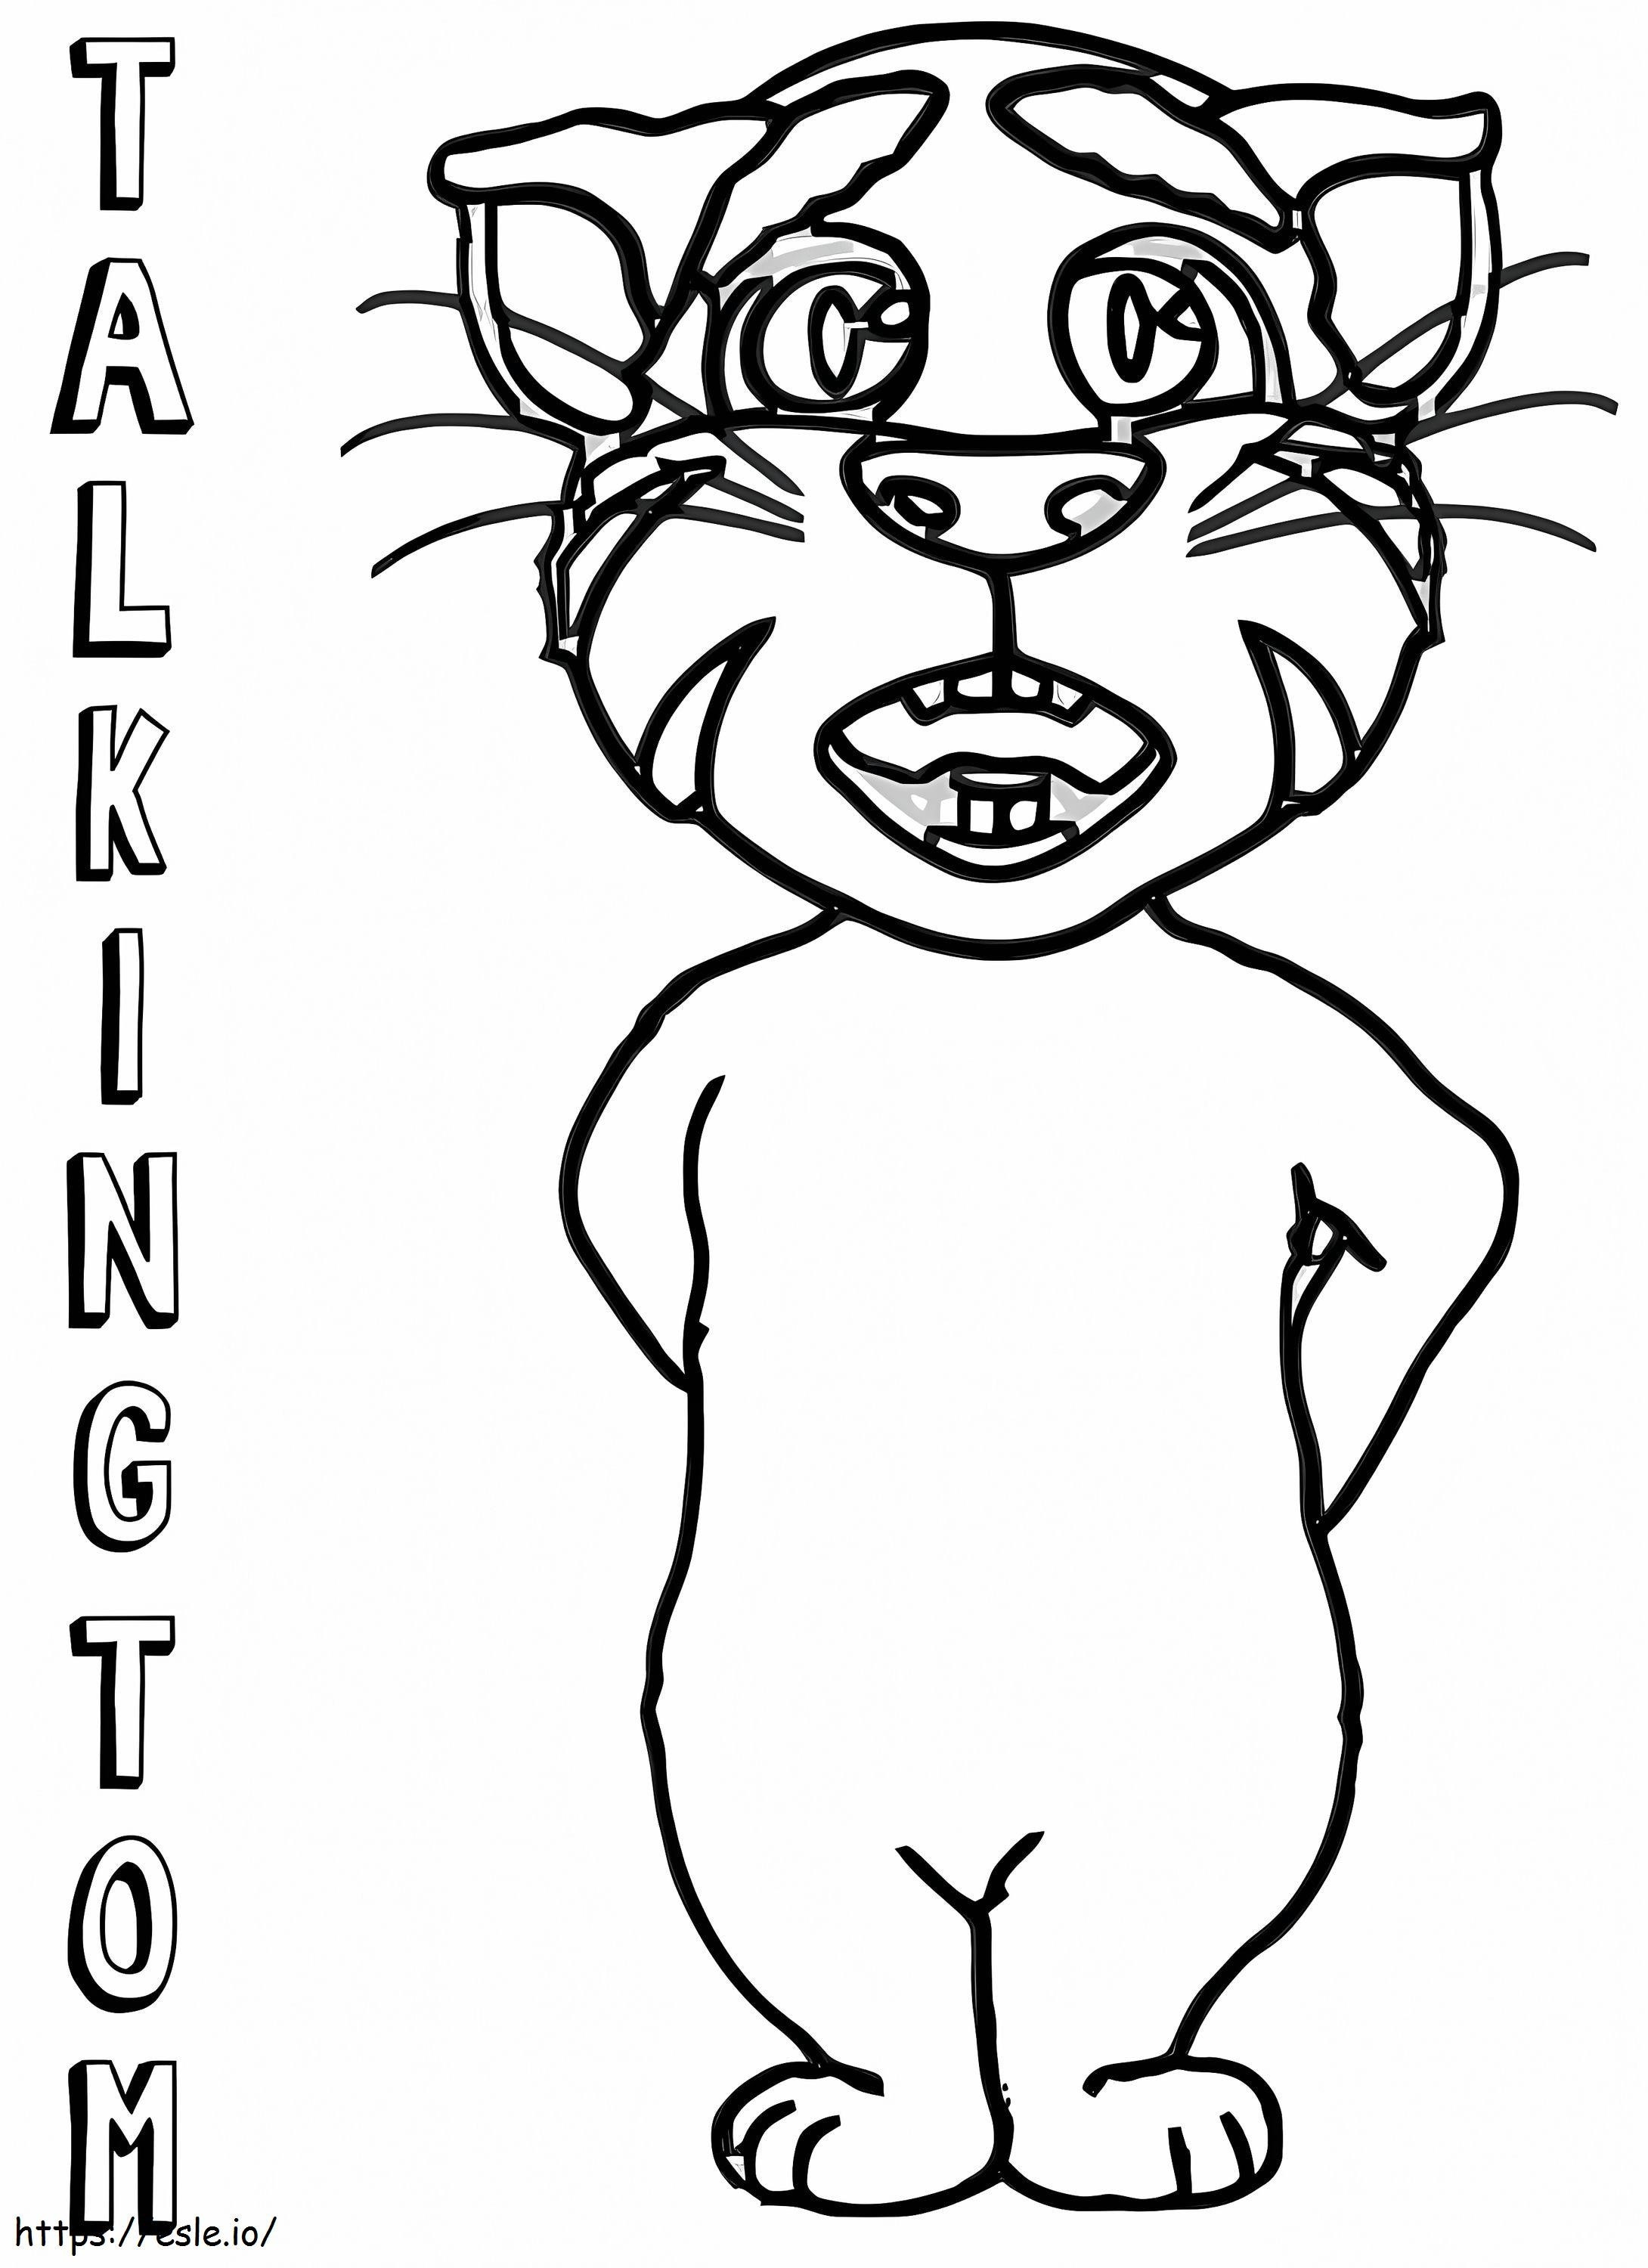 Talking Tom To Color coloring page